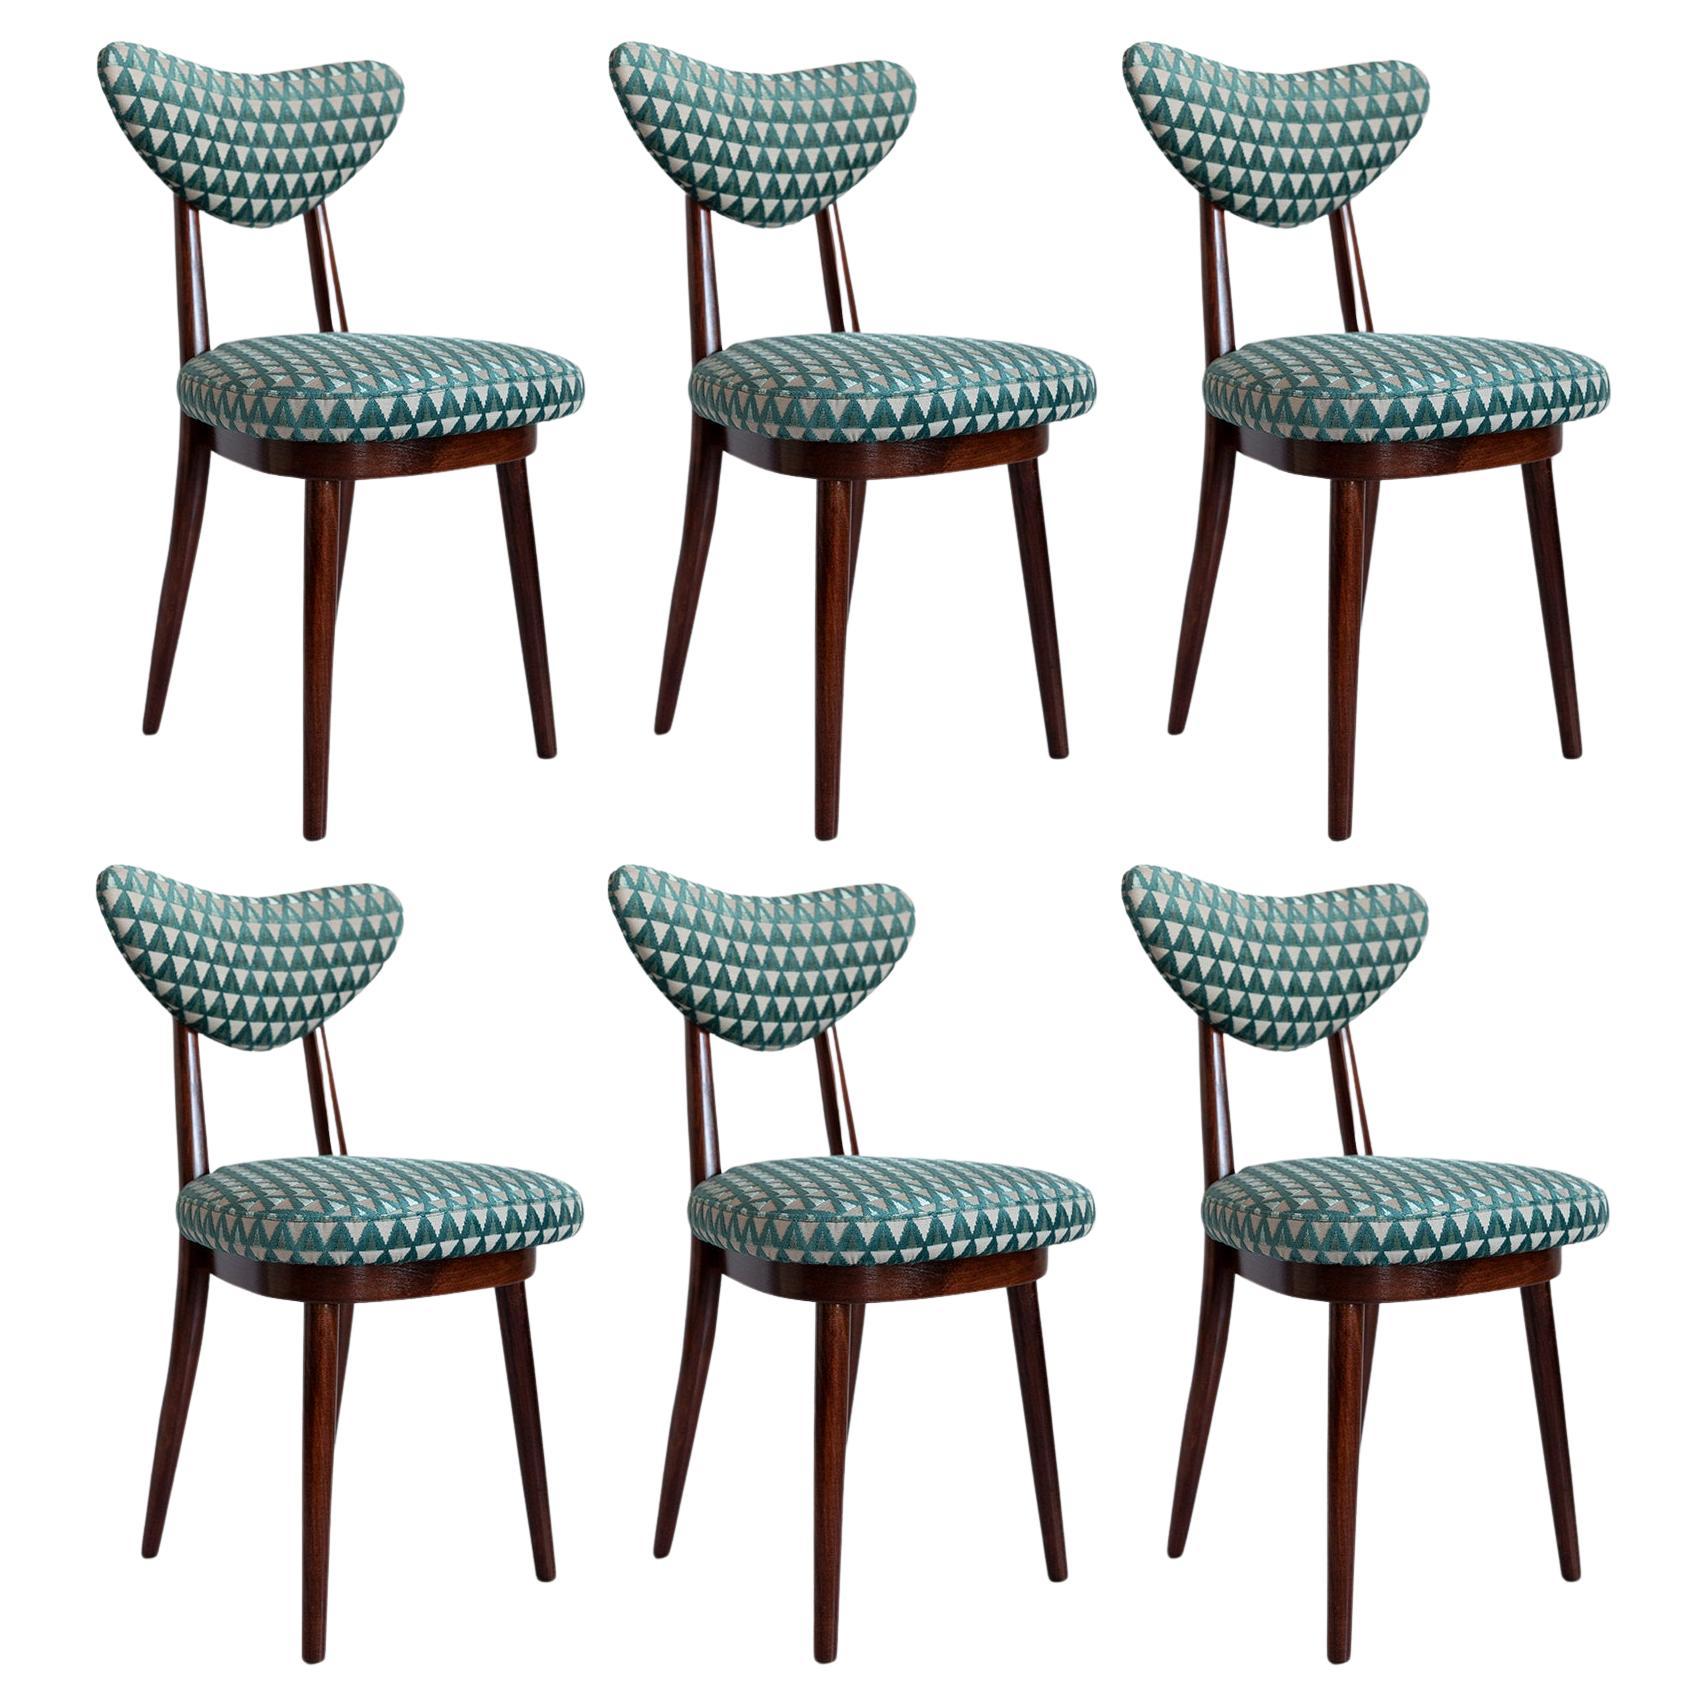 Set of Six Mid-Century Heart Chairs in Amuleto Green Velvet, Europe, 1960s For Sale